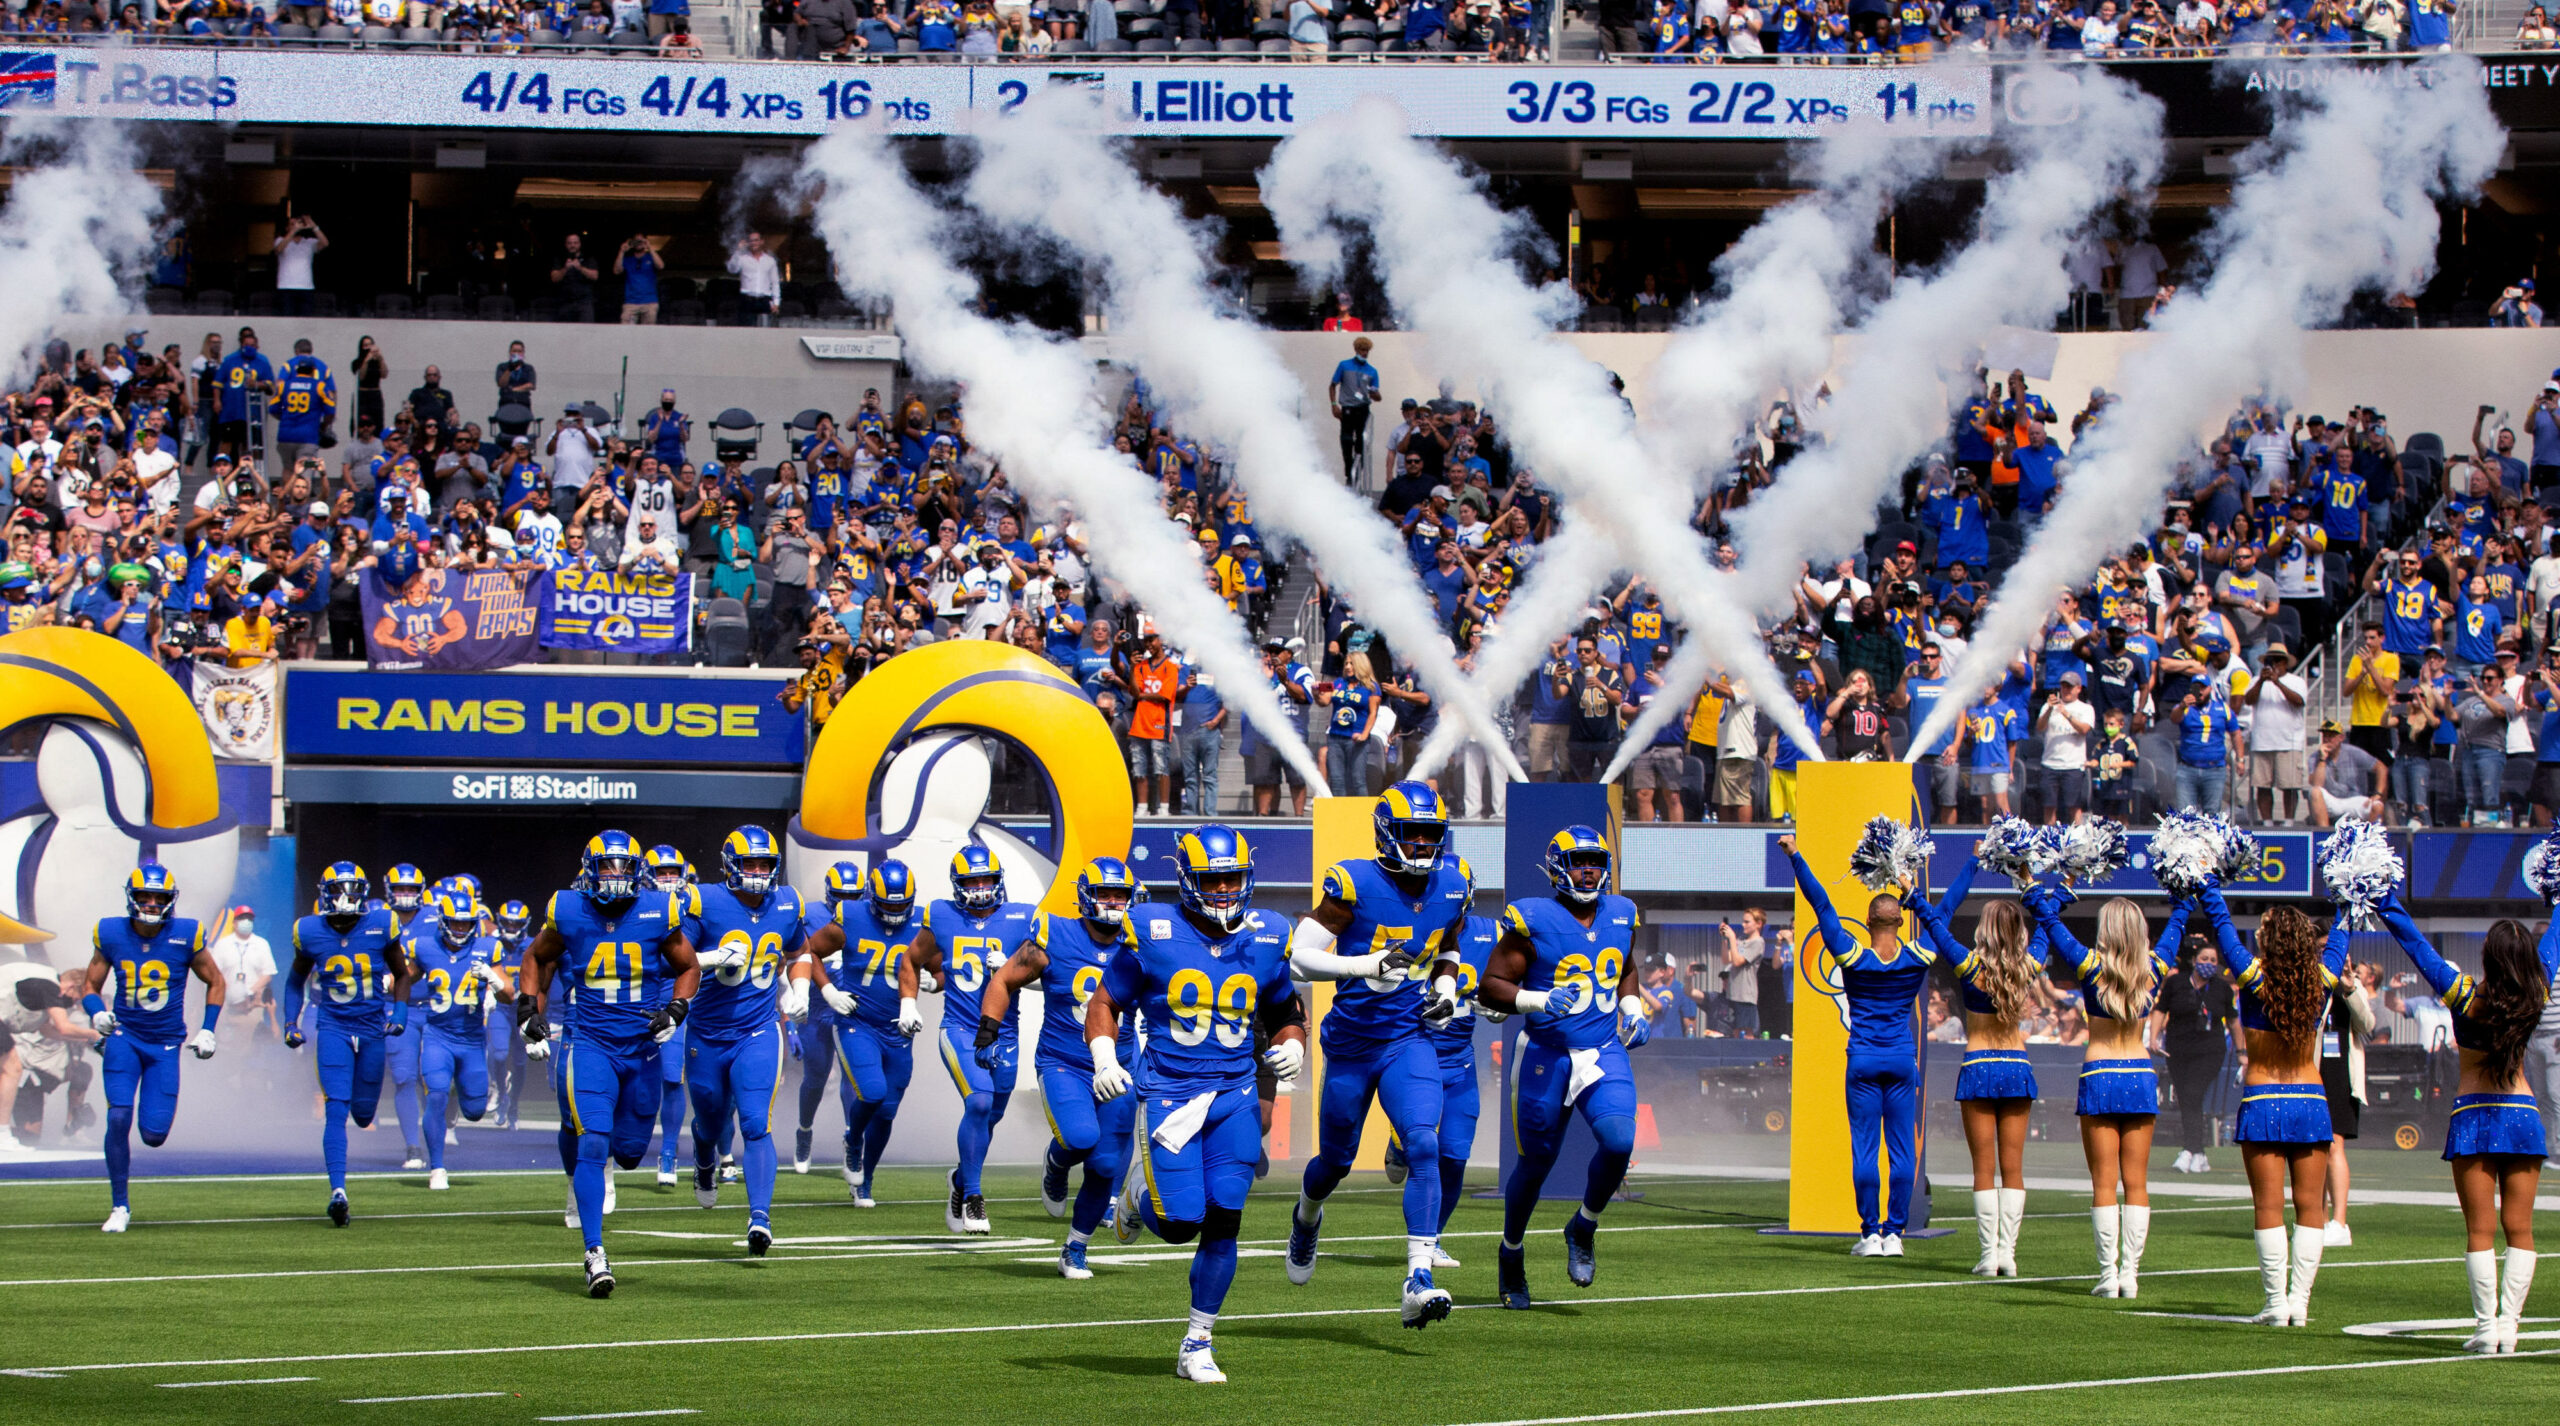 What’s at stake for NFL and St. Louis